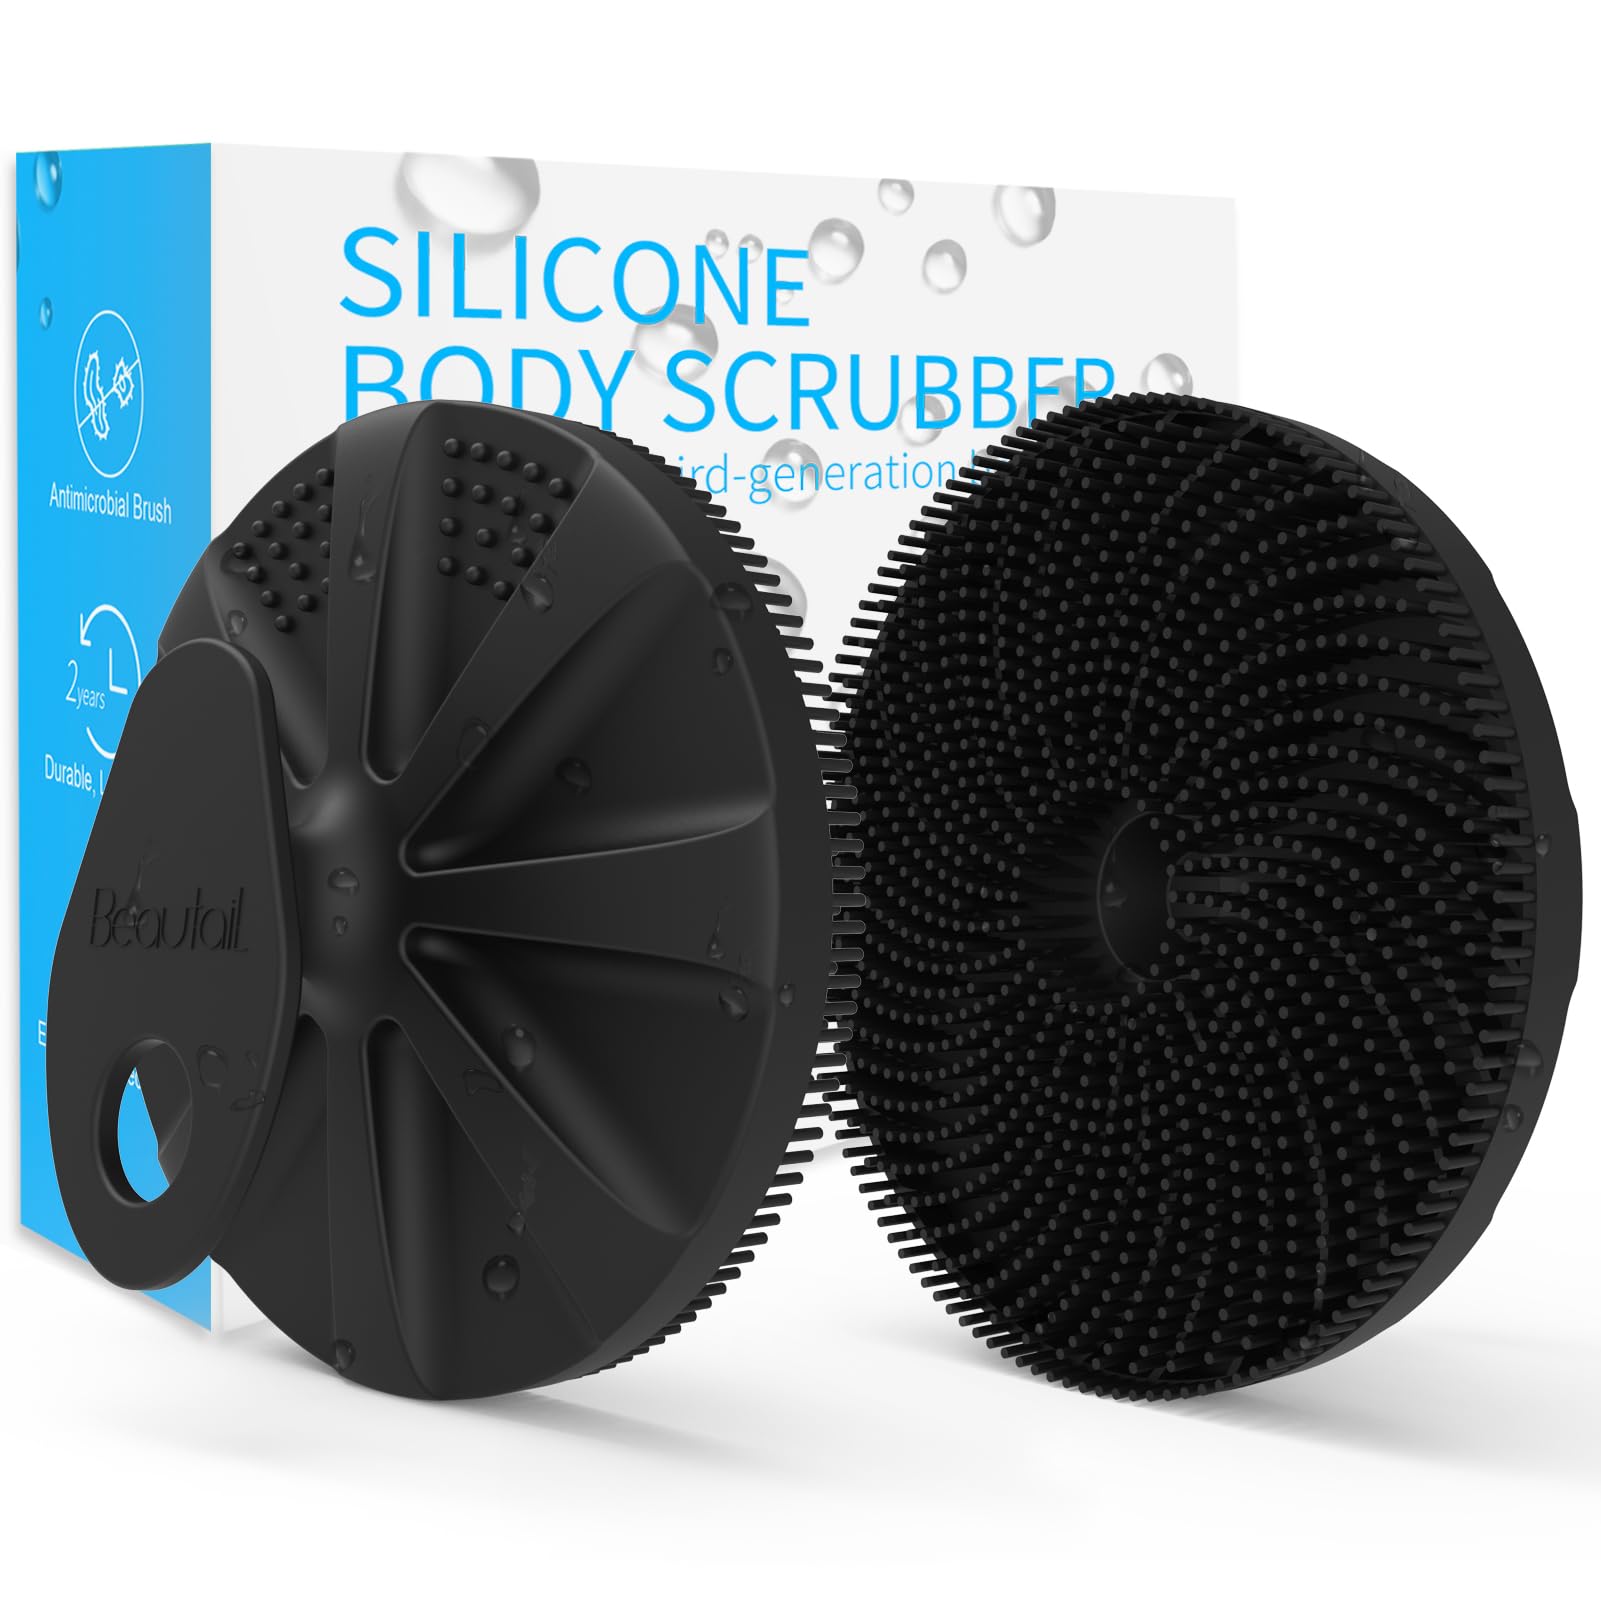 BEAUTAIL Silicone Body Scrubber, Upgrade 3rd Generation Shower Bath Brush, Lather Nicely, Soft Massage Body, More Hygienic Than Traditional Loofah, Gentle Exfoliating for Sensitive Skin, 1 Pack, Black